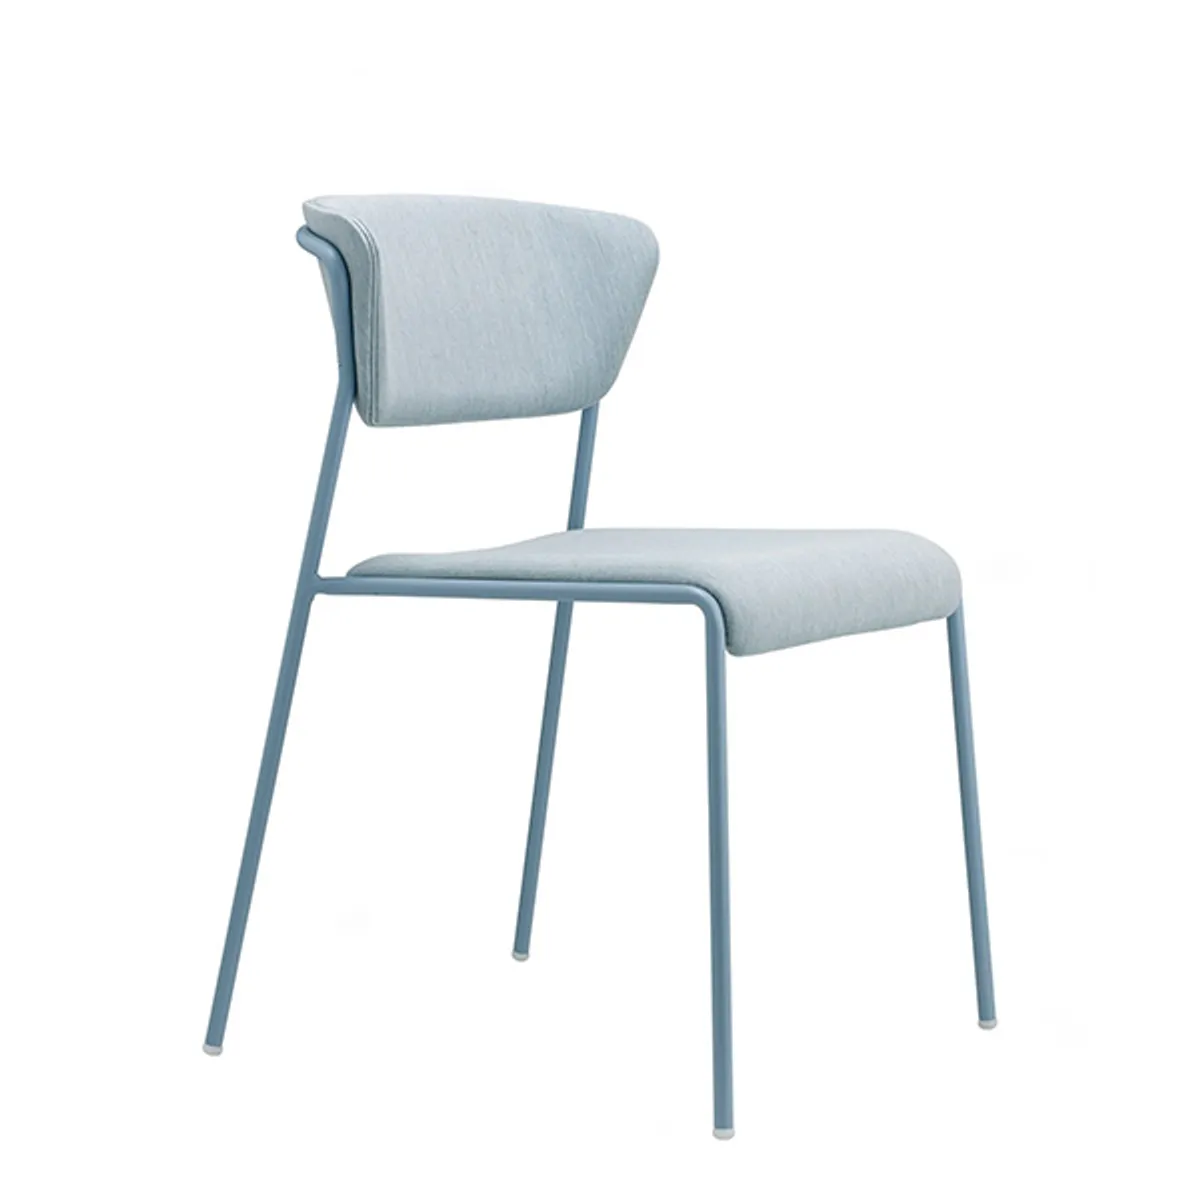 Robyn Soft Outdoor Chair Blue 07